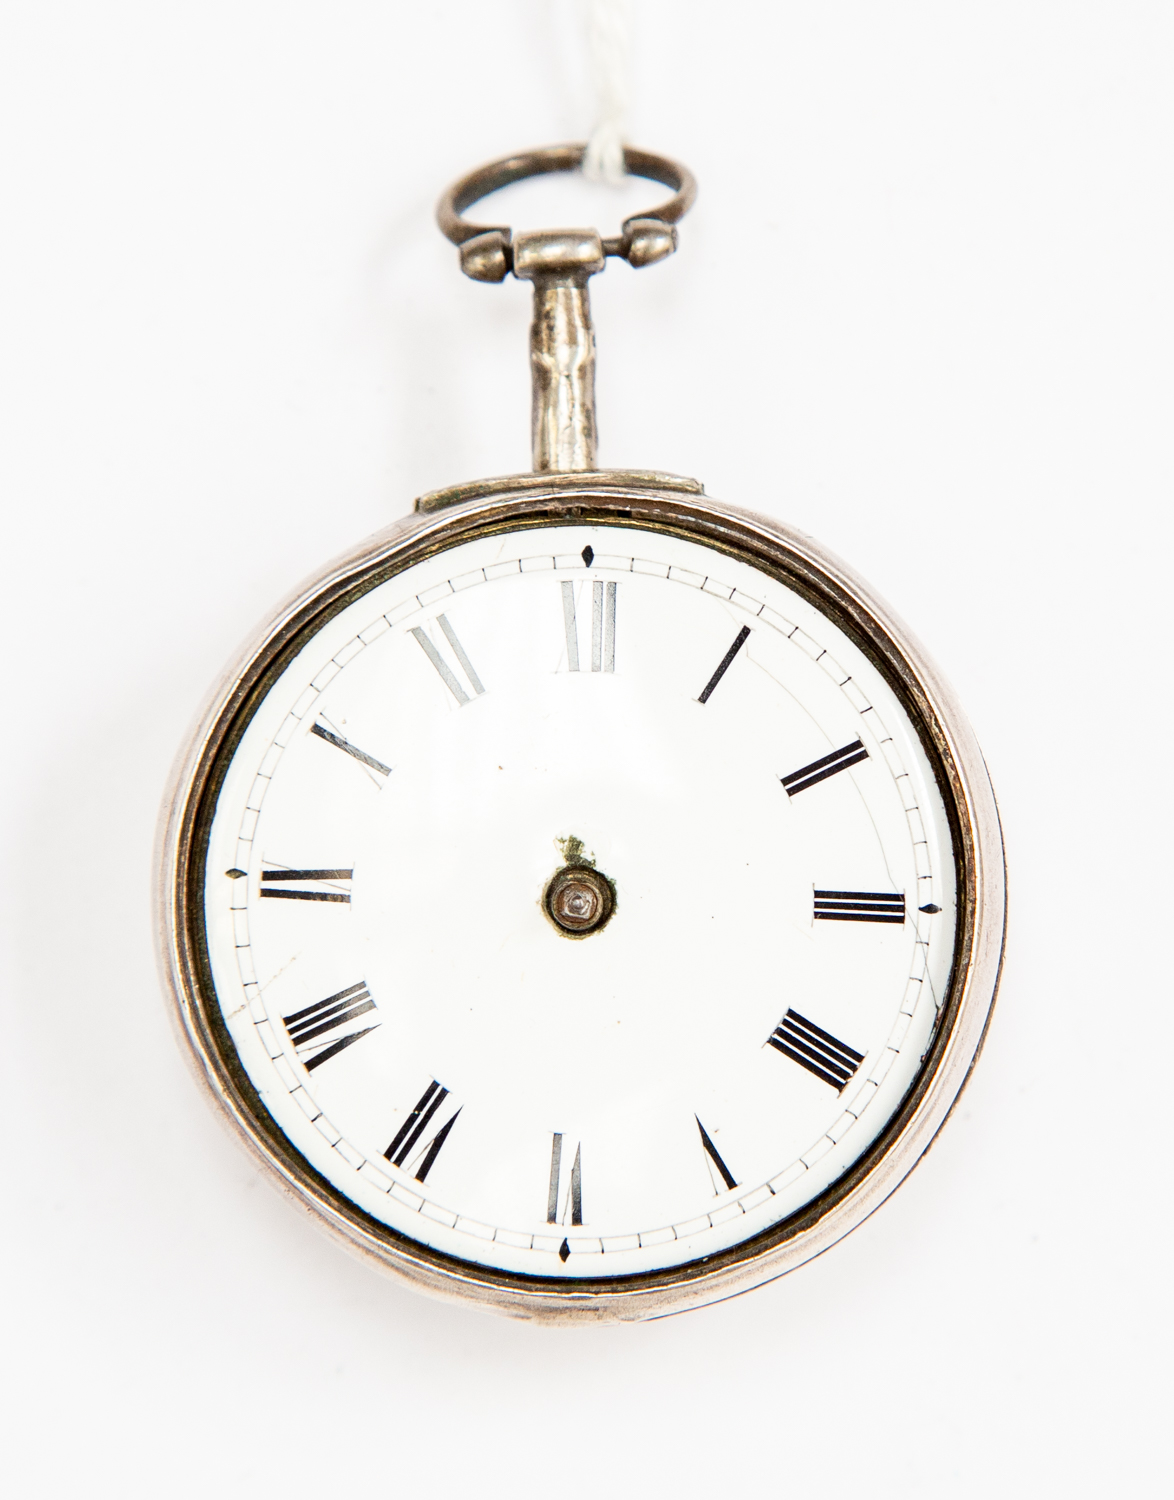 A George III silver Fusee pocket watch by F. Richards, London 1796, No.